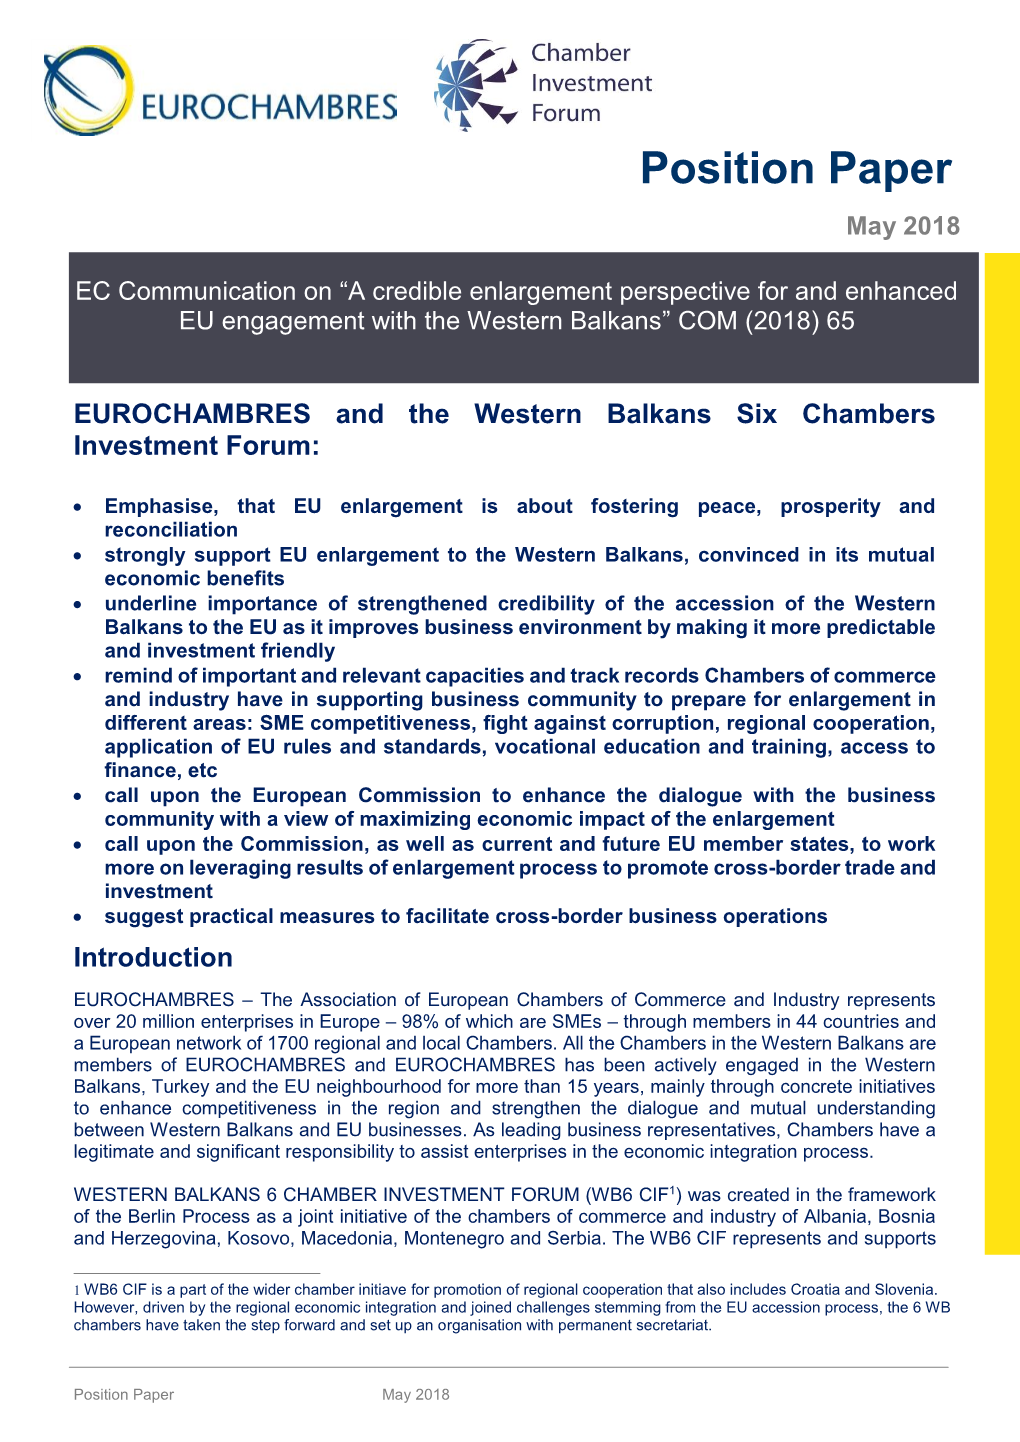 (CCI) in the EU and the Western Balkans: a Credible Enlargement Perspective Means Predictability, Growth and Jobs